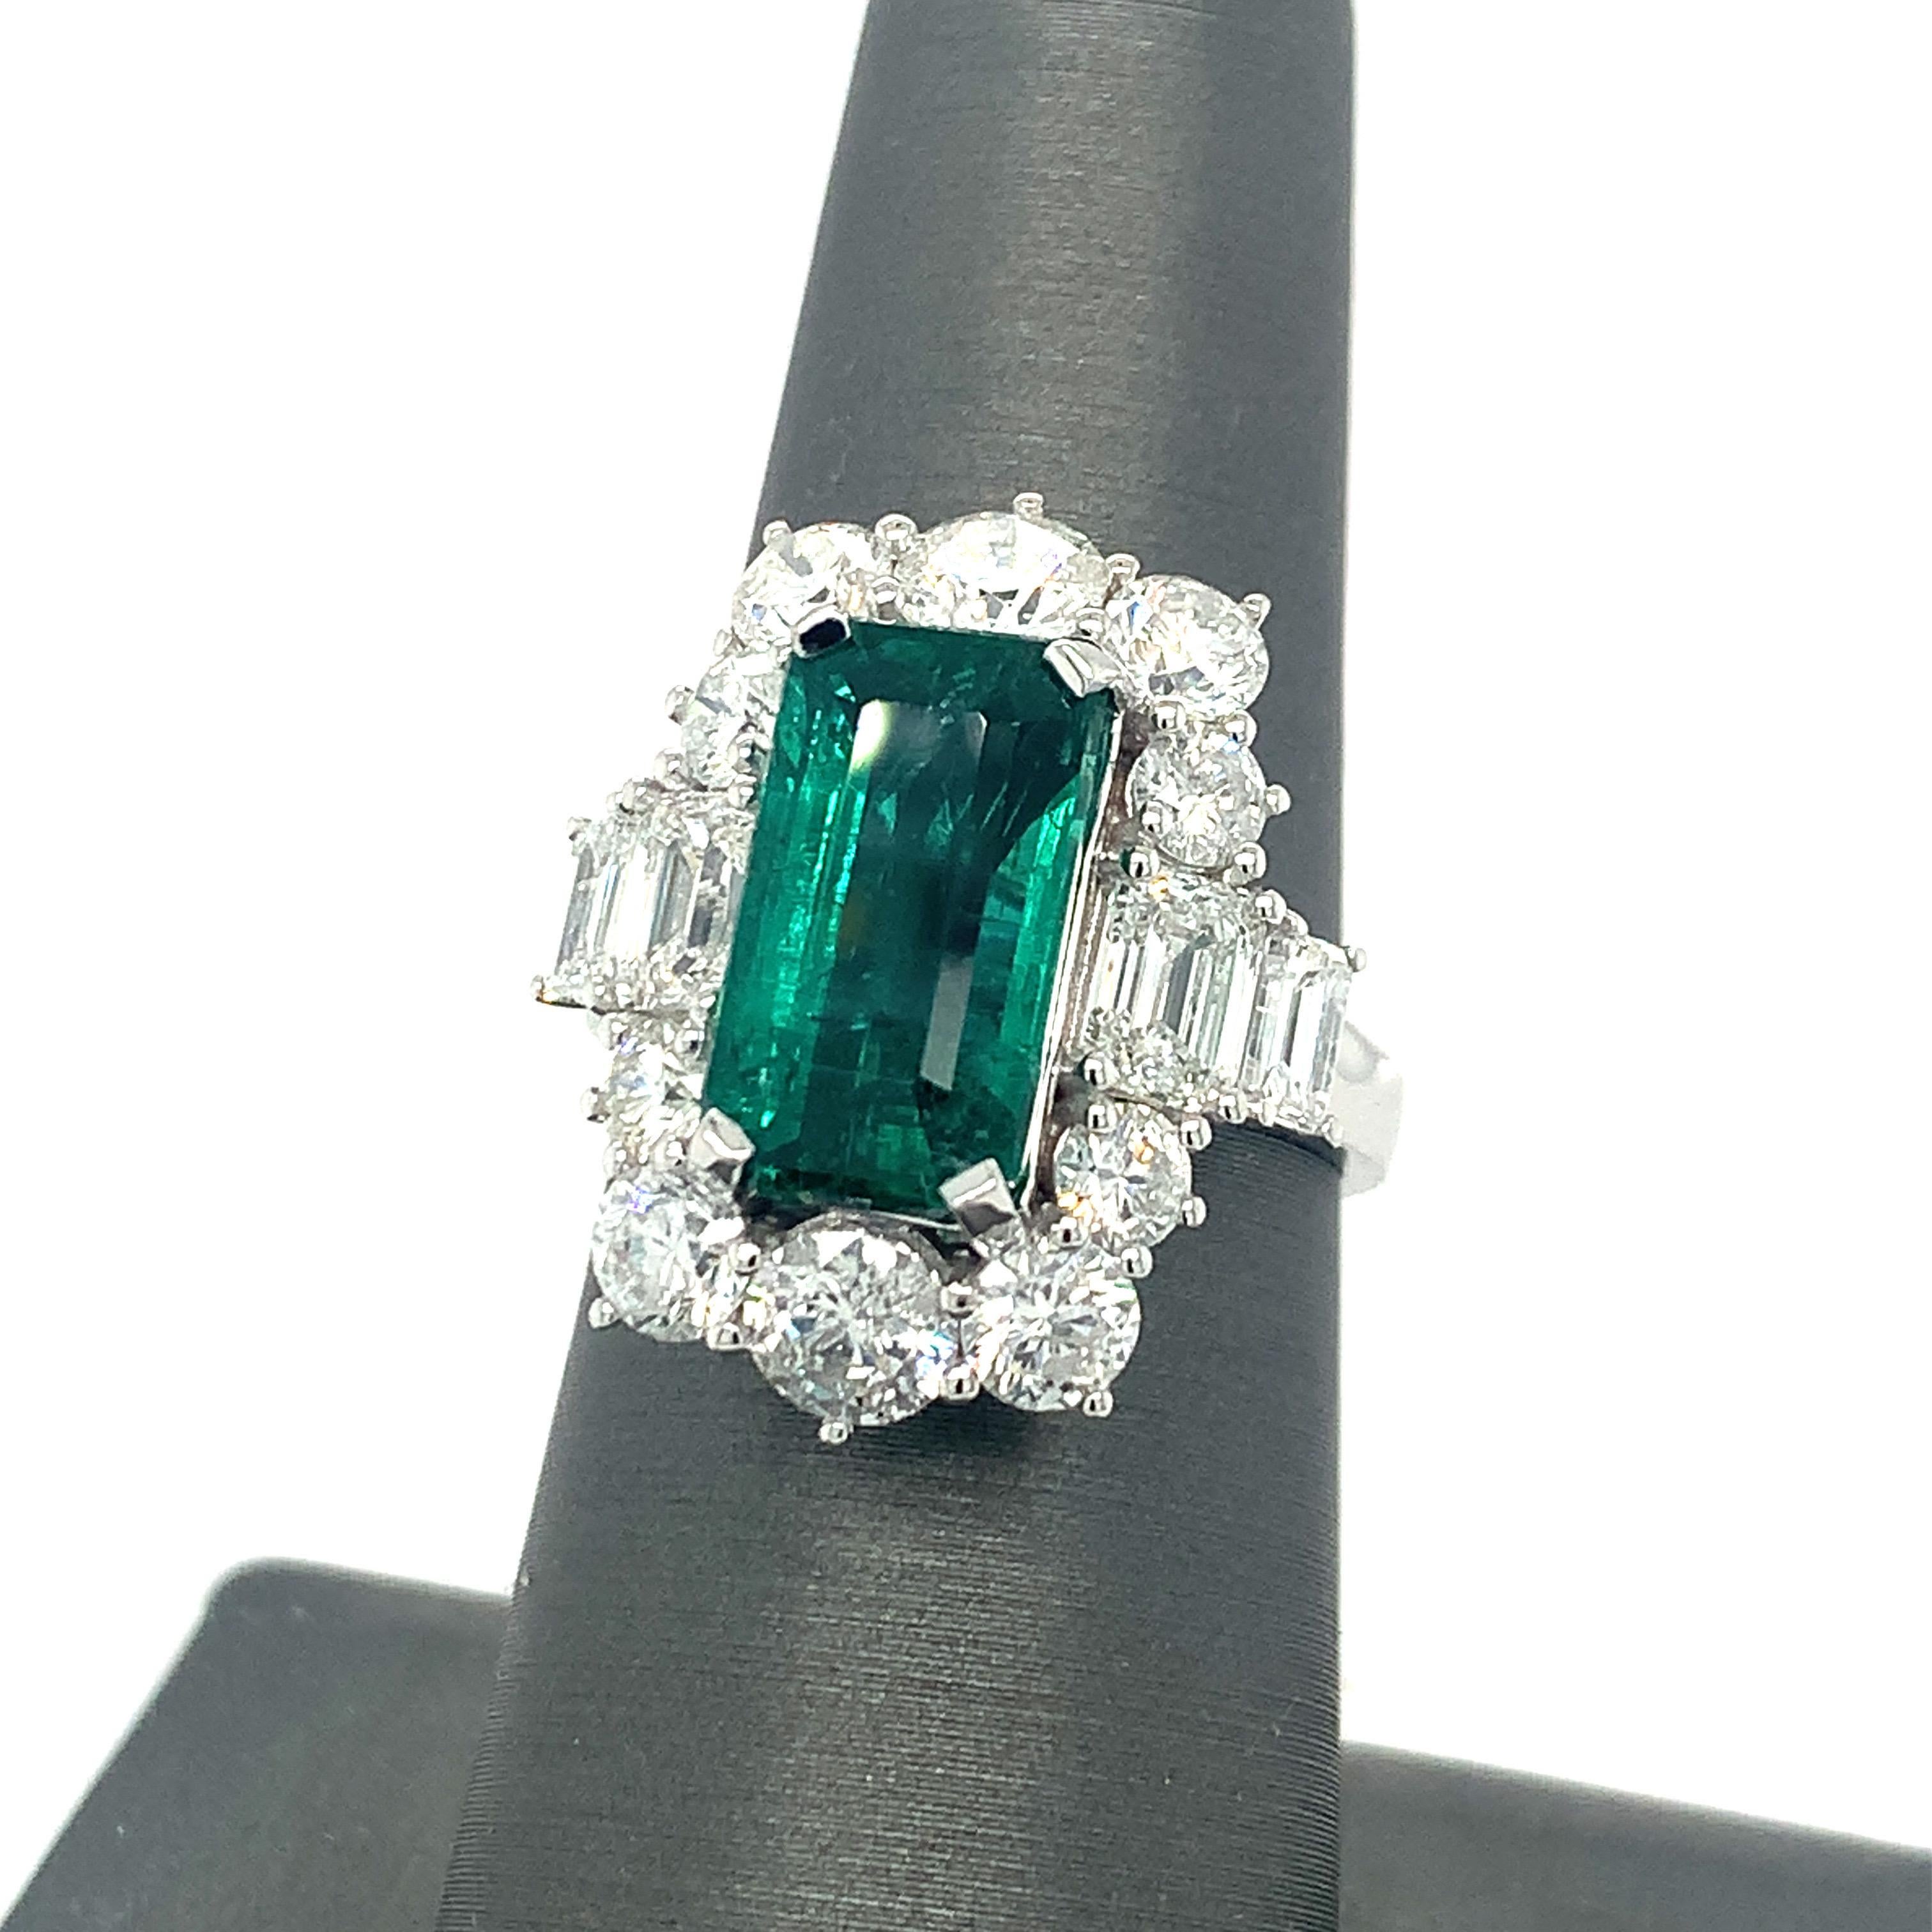 This exceptional creation, Emerald ring has an array of ten brilliant cut diamonds surrounding the center stone and four additional emerald cut diamonds on the sides. The center stone, Emerald cut Emerald, is GIA certified and also the Emerald cut